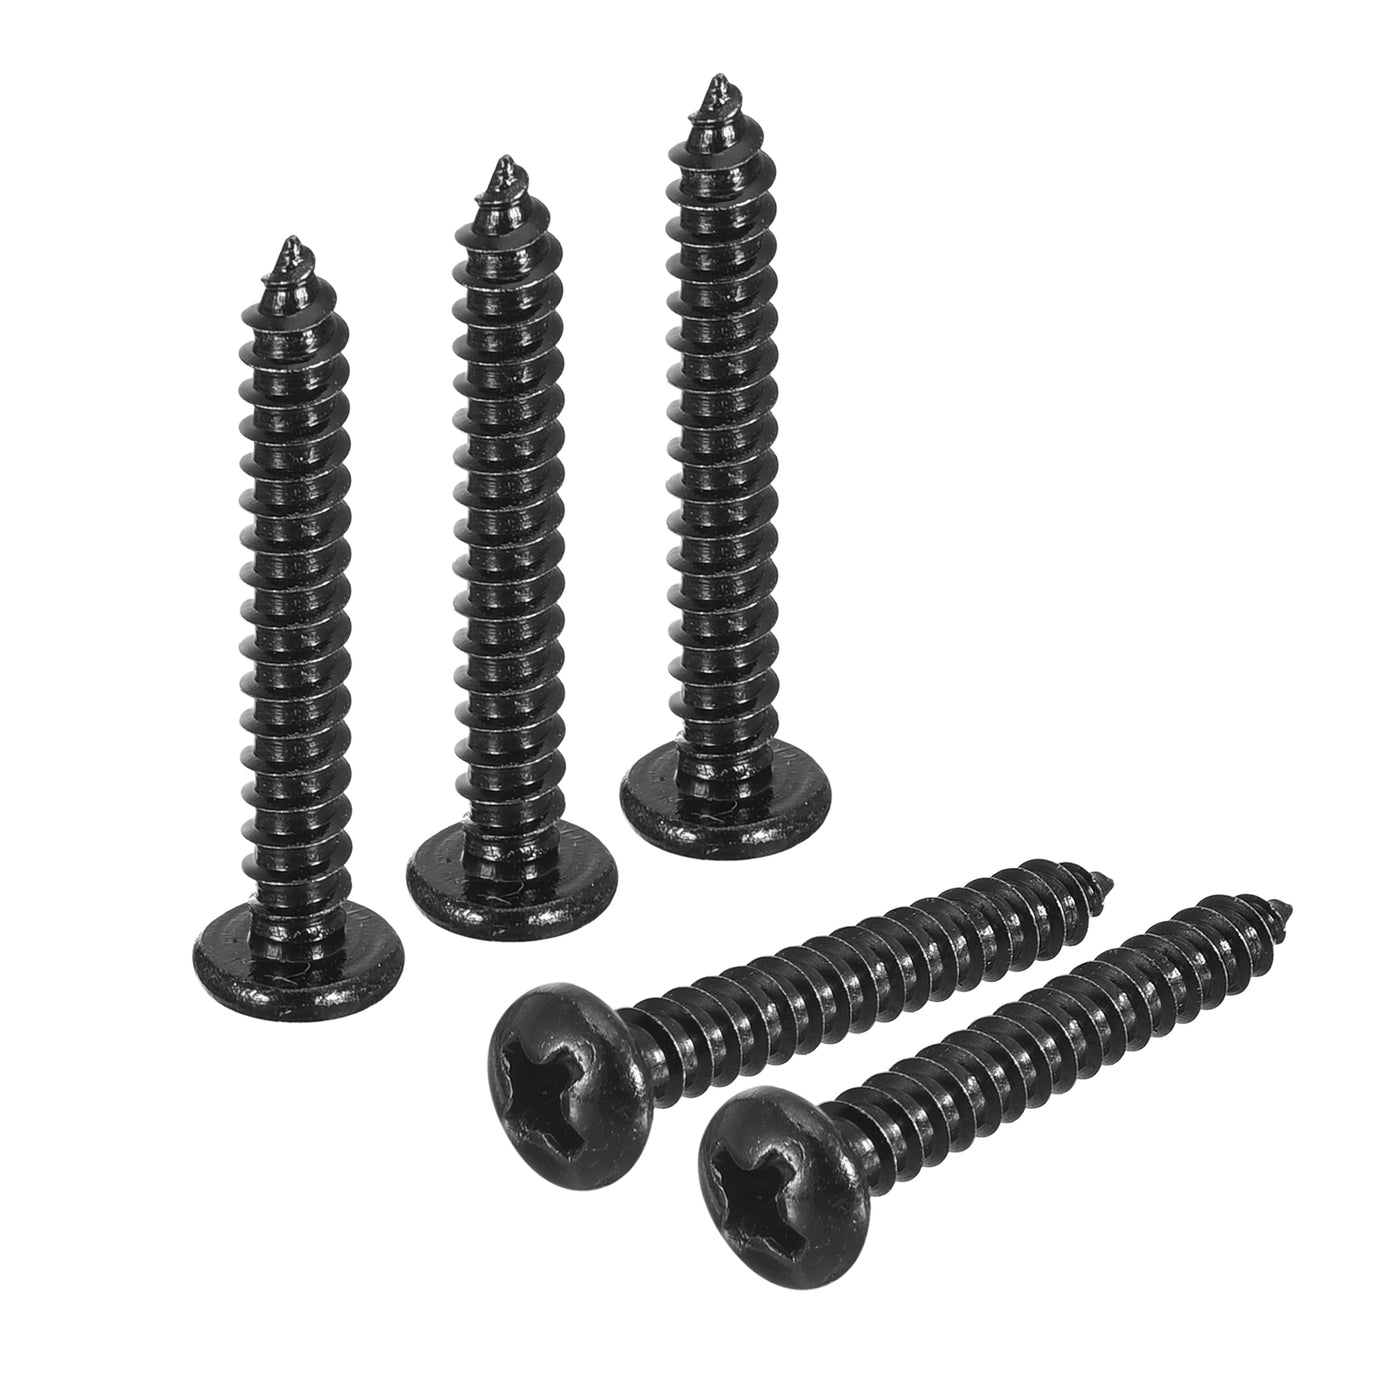 uxcell Uxcell #6 x 1" Phillips Pan Head Self-tapping Screw, 50pcs - 304 Stainless Steel Round Head Wood Screw Full Thread (Black)